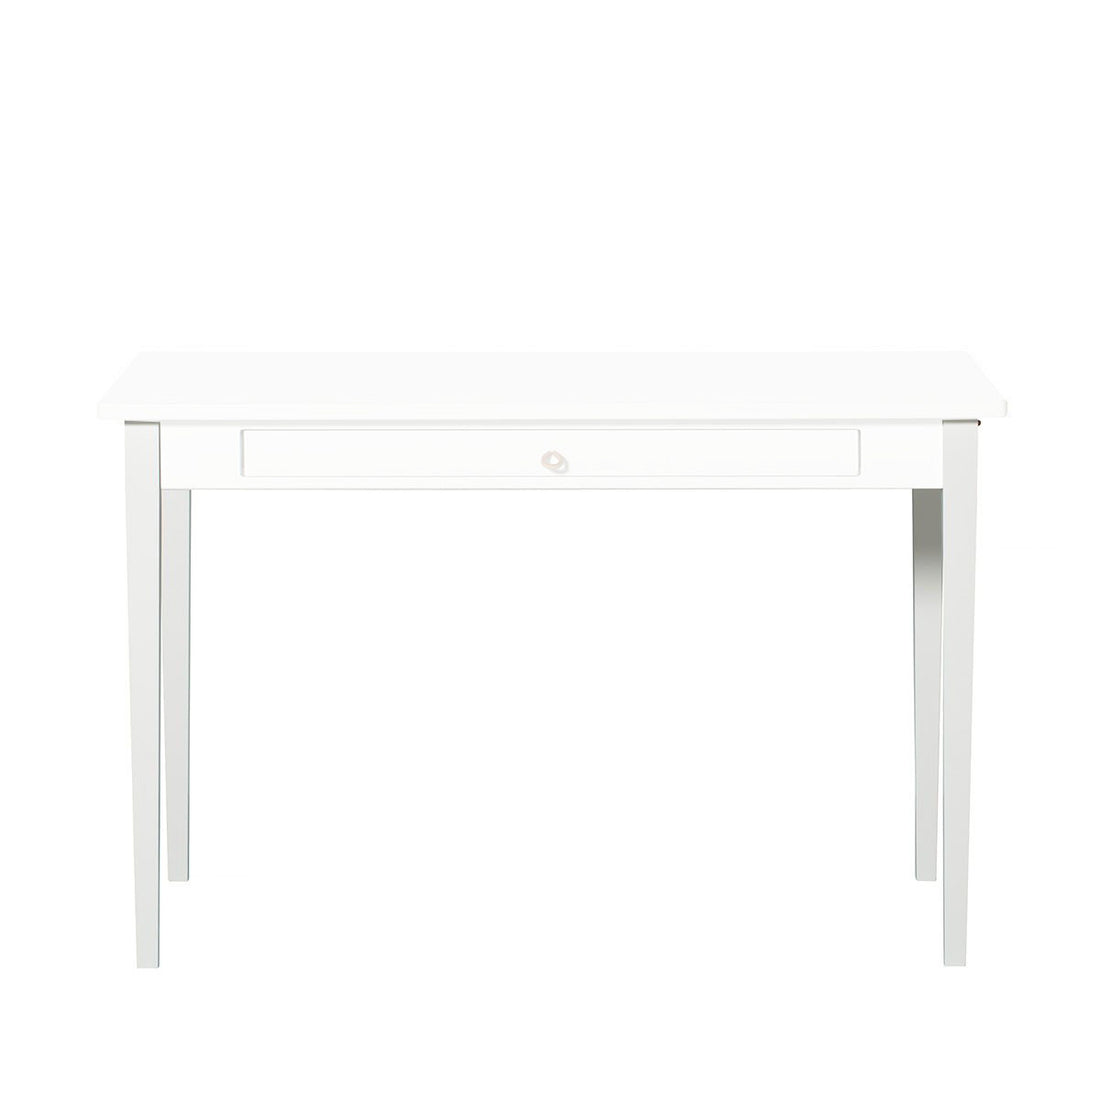 Oliver Furniture Seaside Additional Legs for Seaside Junior Table Single Drawer with Leather Strap 021015